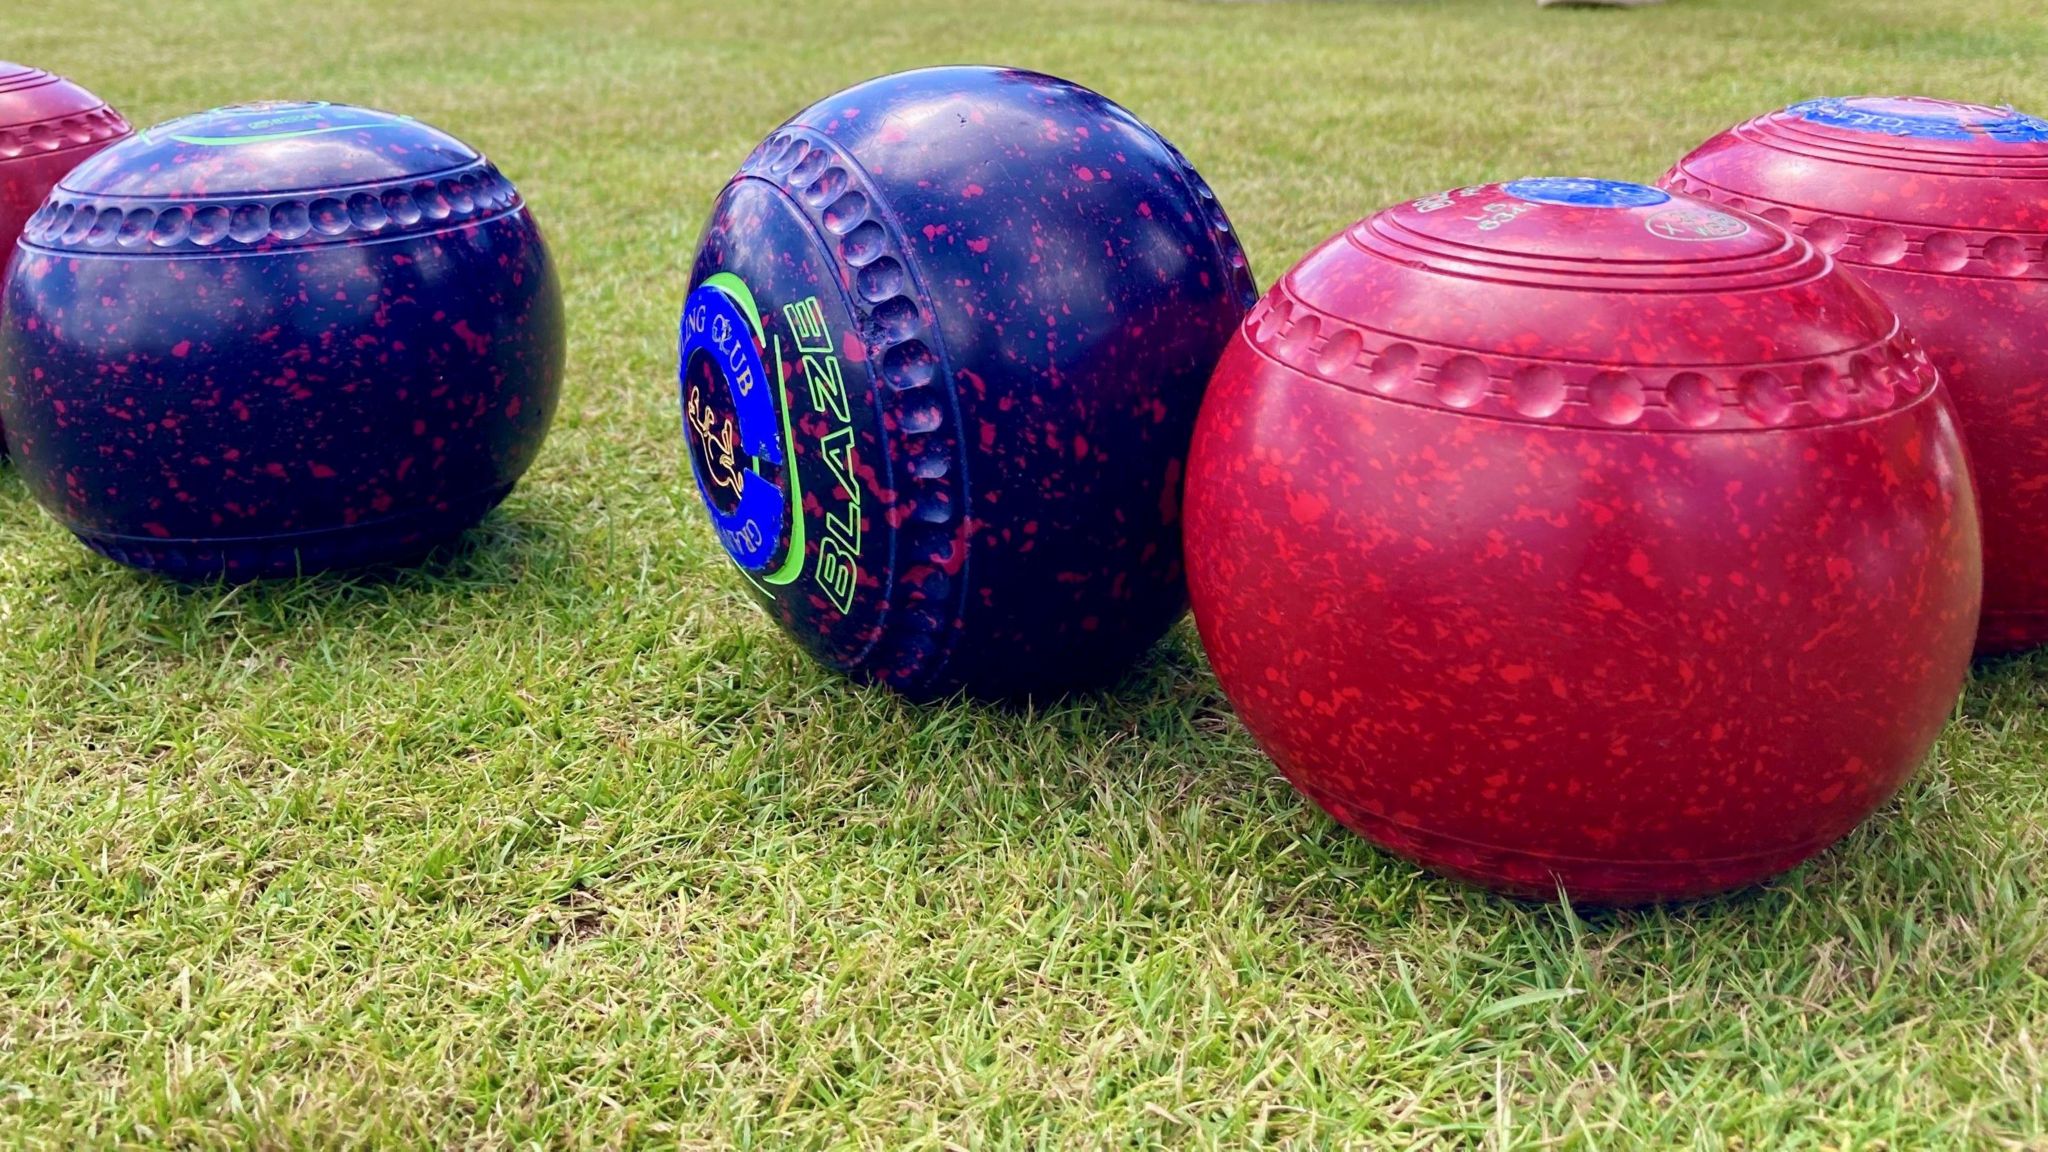 A close-up photograph of some bowling balls